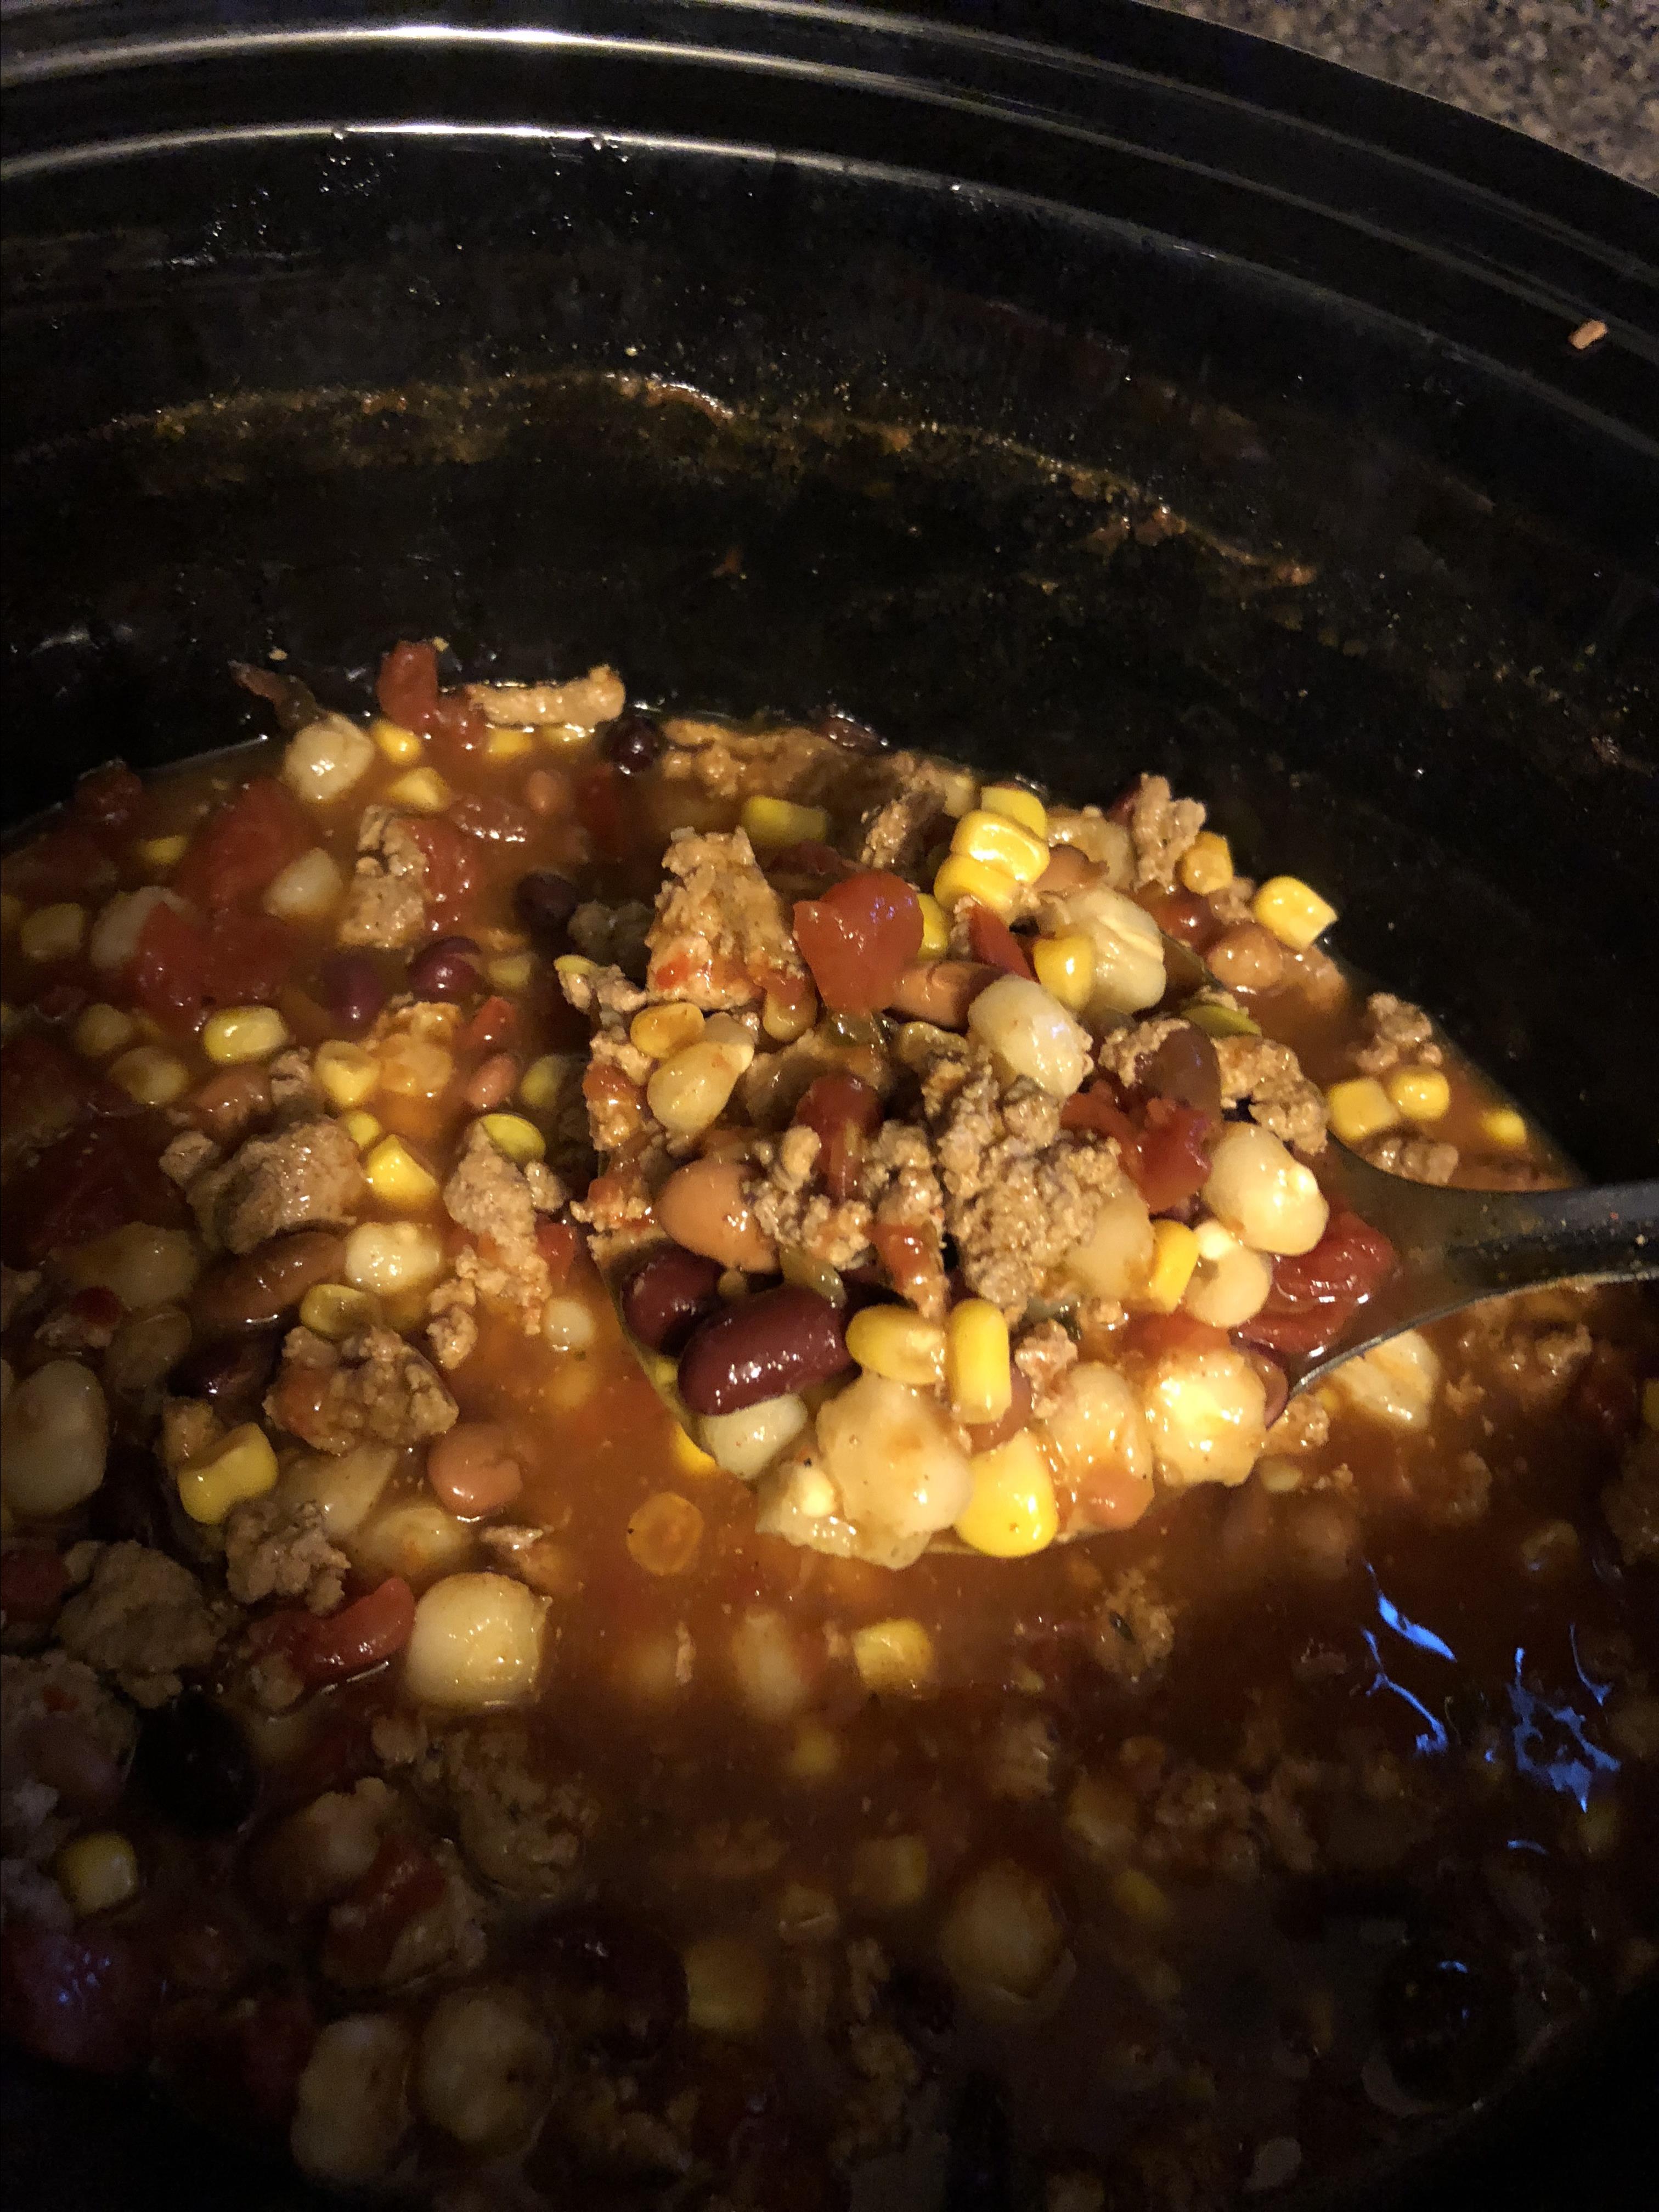 Taco Chili from Publix®